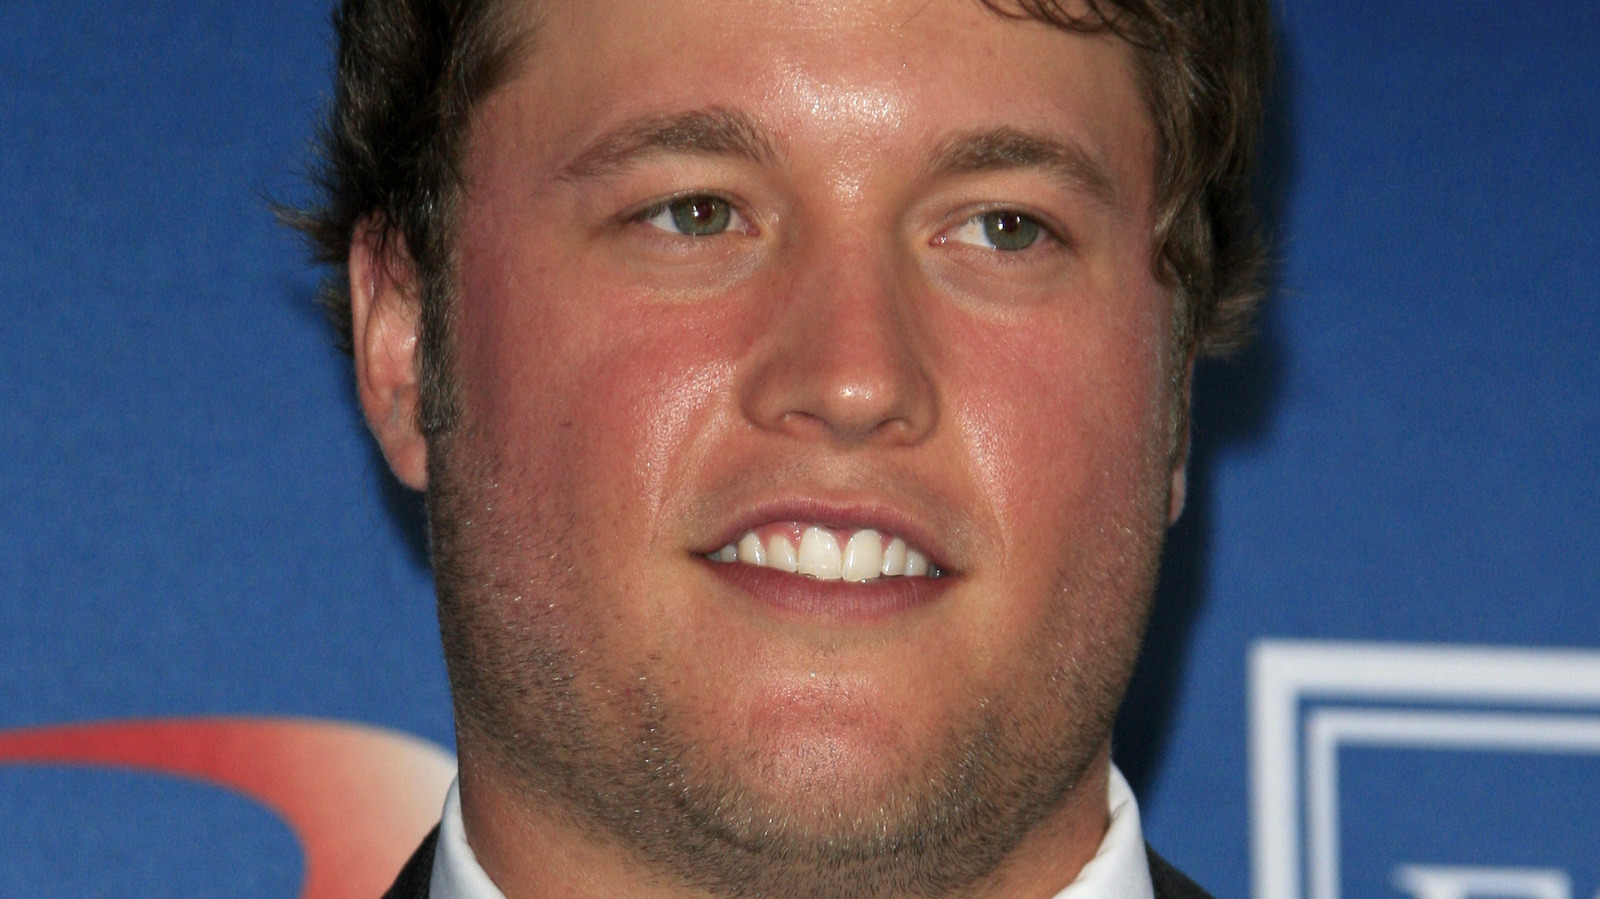 Matthew Stafford Breaks Silence After Super Bowl Parade Incident